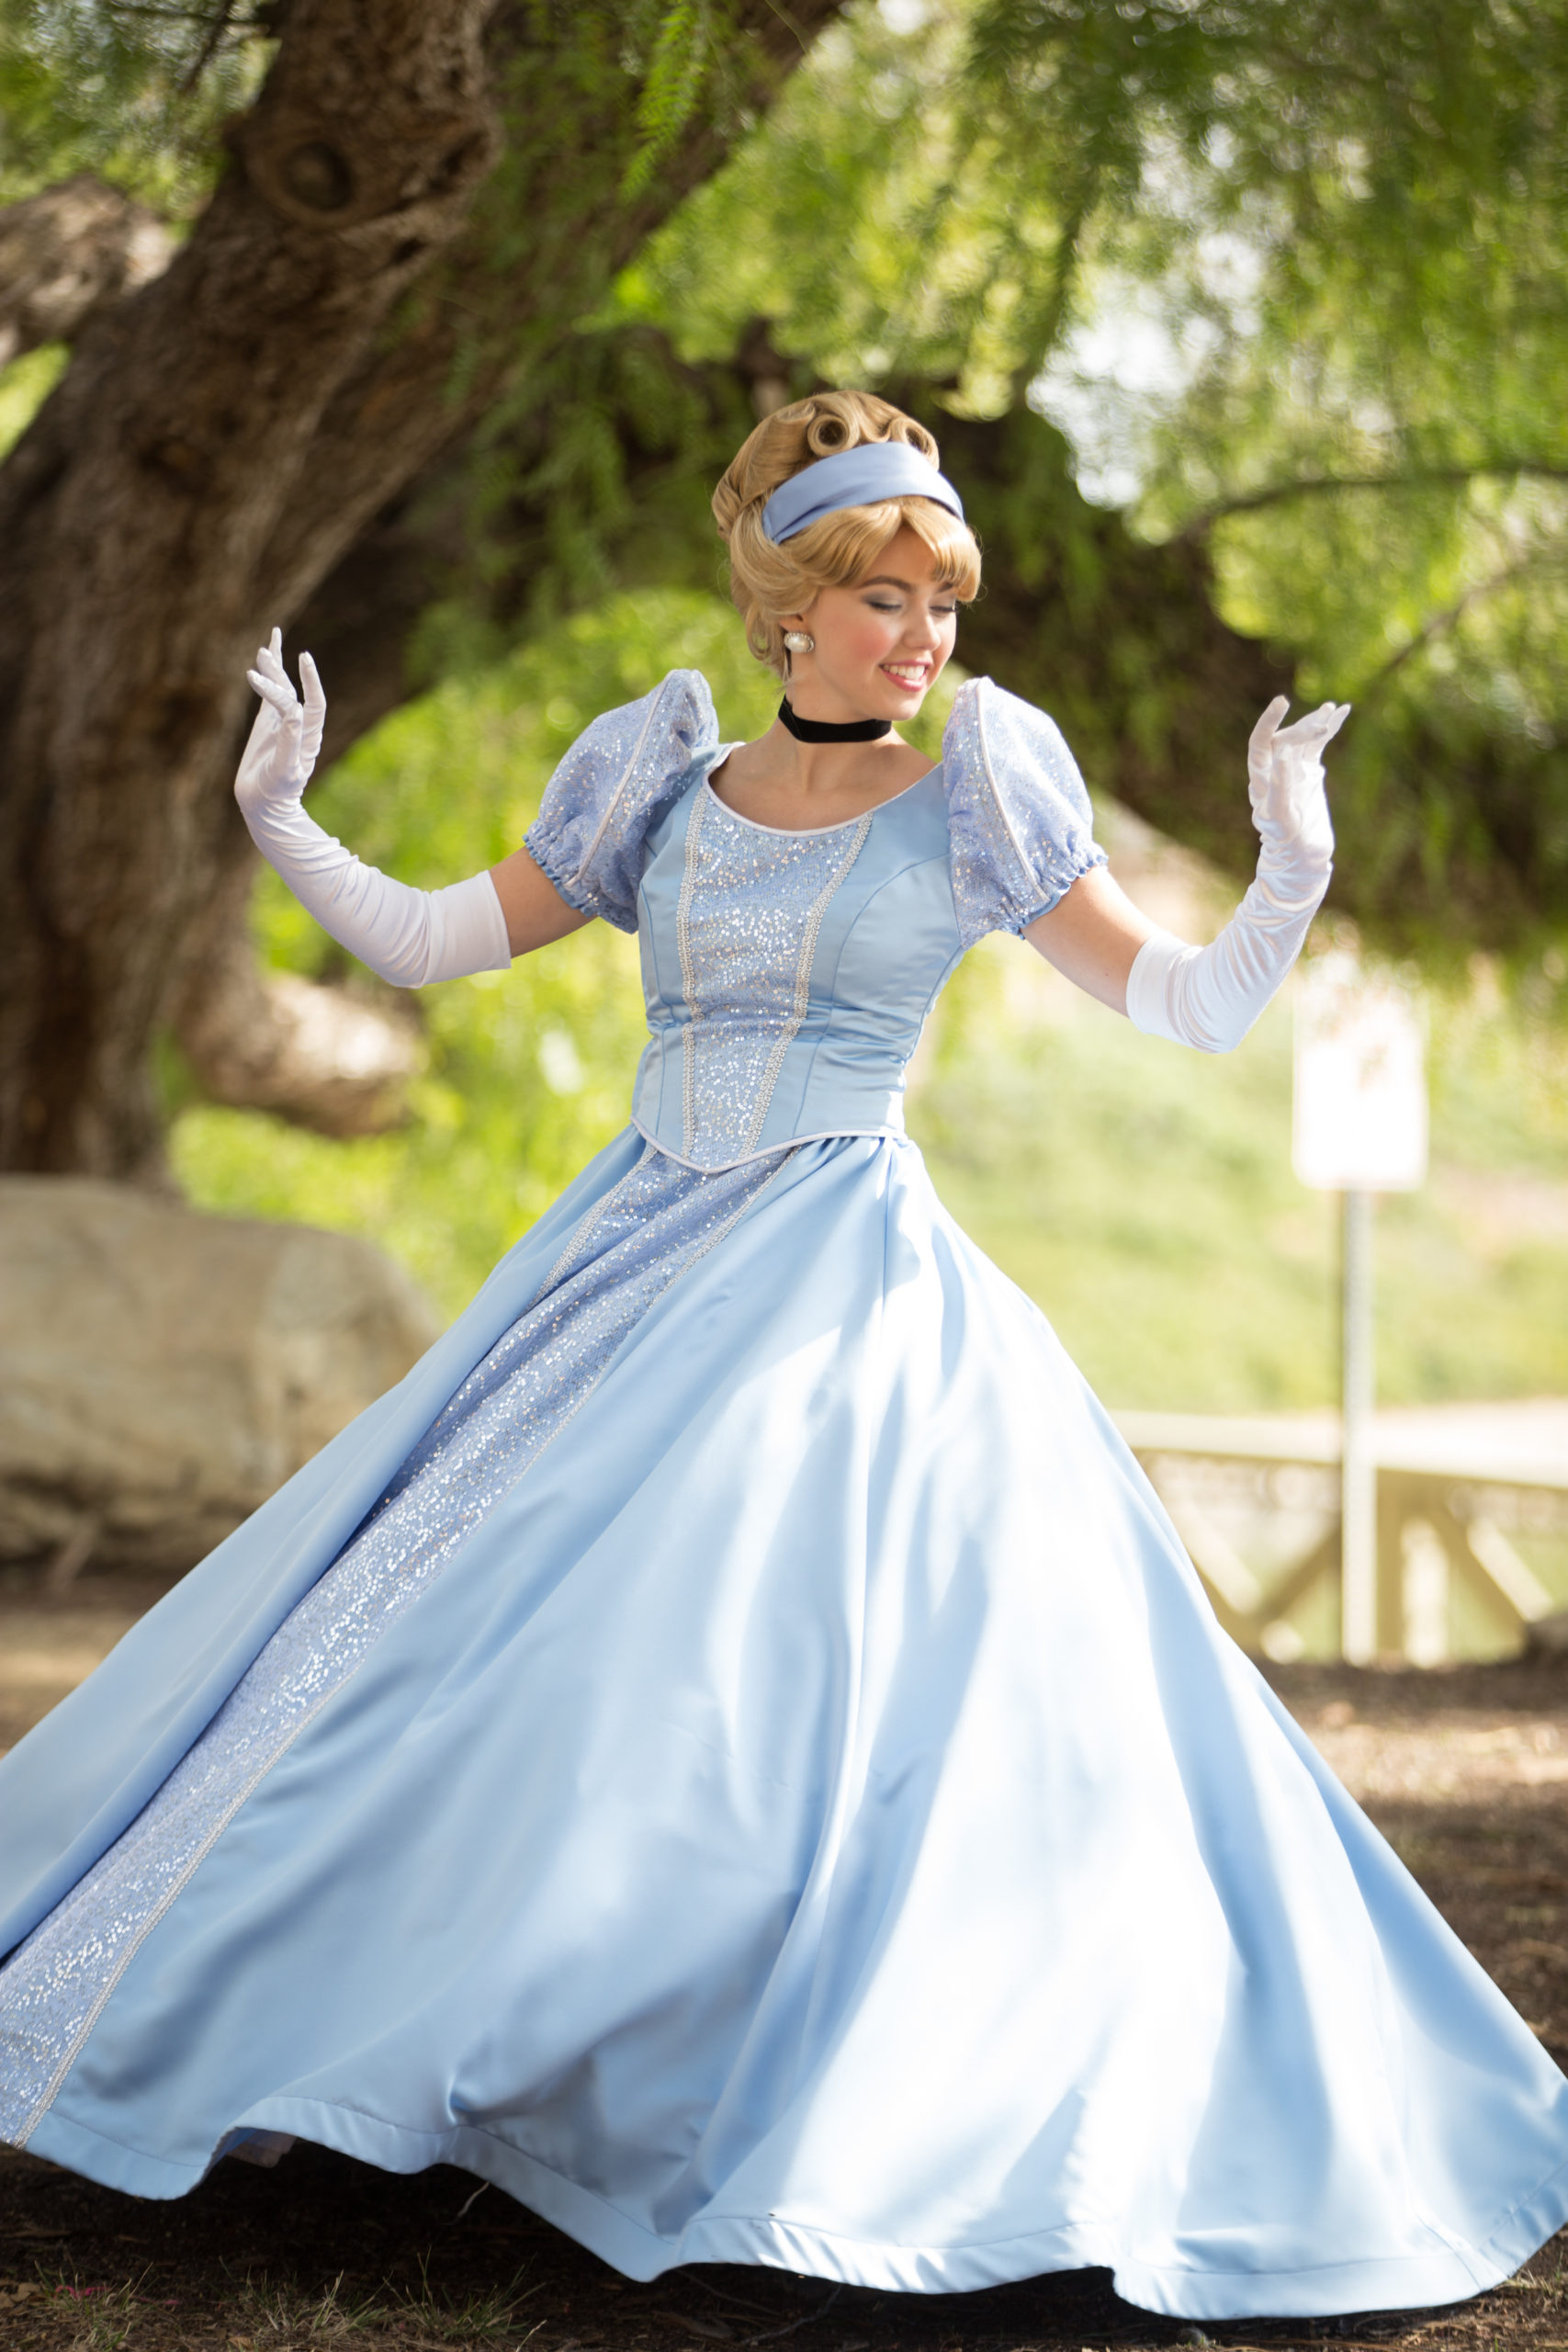 cinderella party character for hire in los angeles and orange county